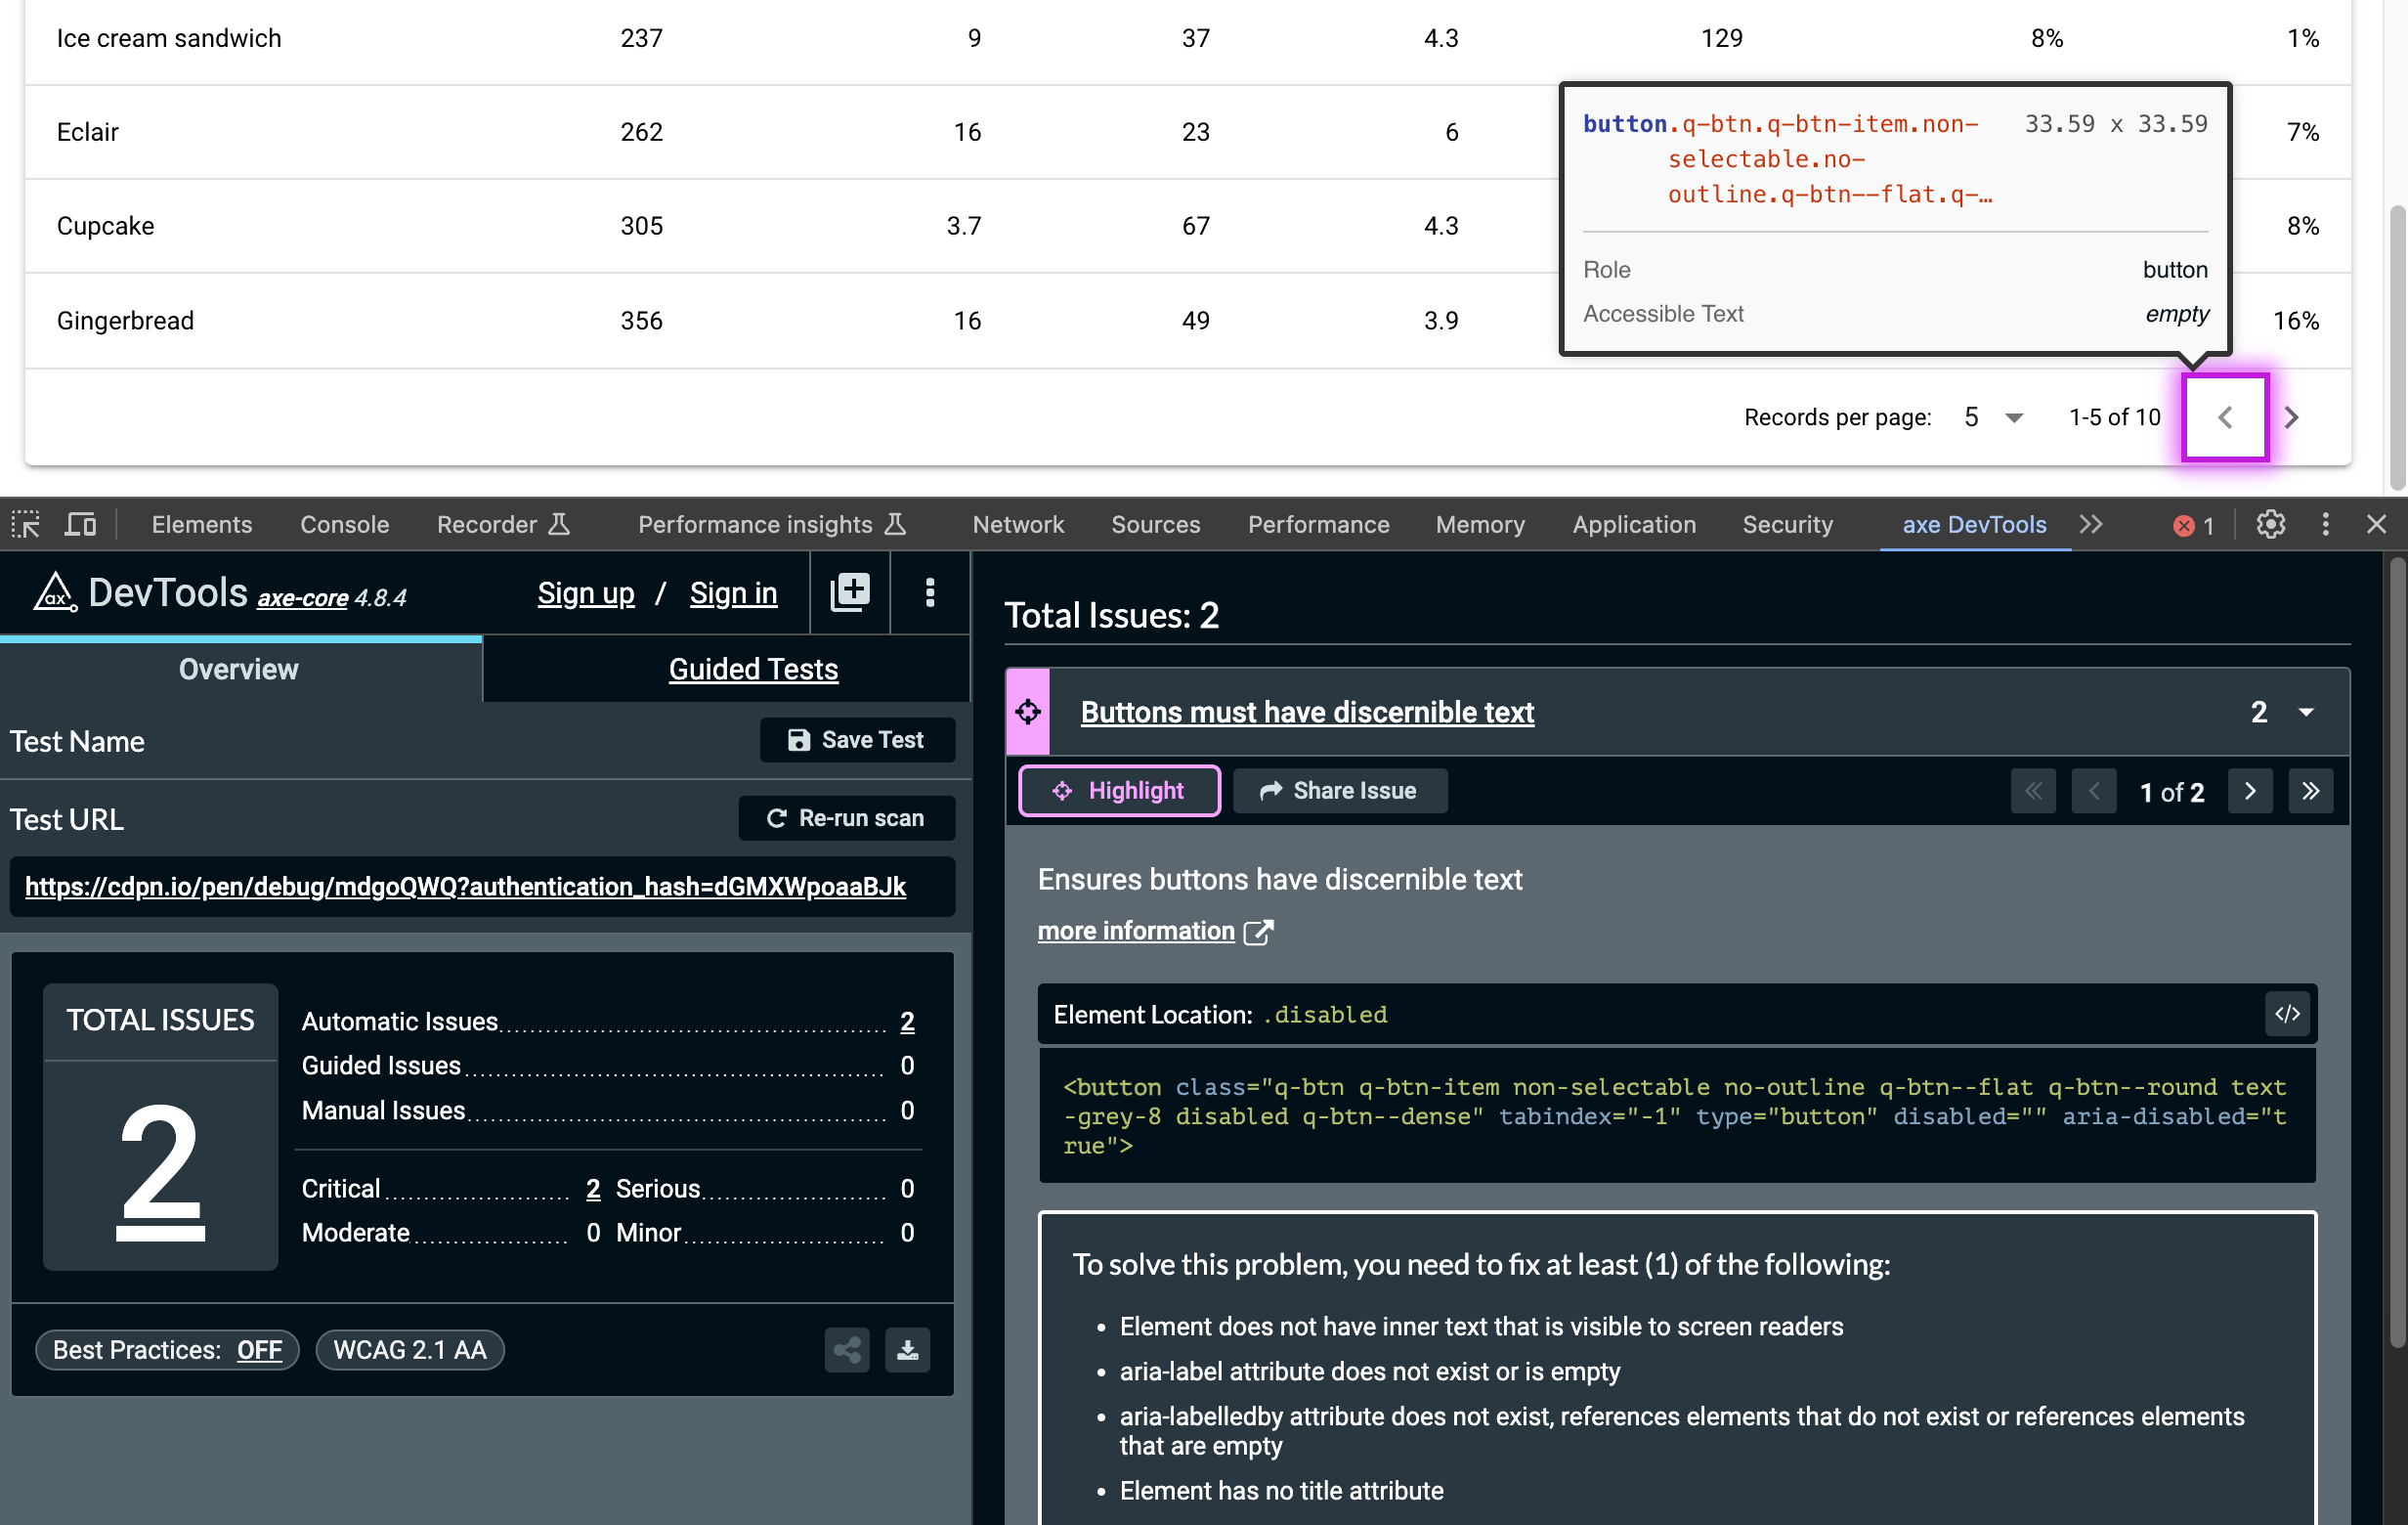 Screenshot of axe DevTools for Chrome on a CodePen with a basic QTable. Two 'Buttons must have discernible text' issues are detected. One of the two pagination buttons is highlighted for this issue.